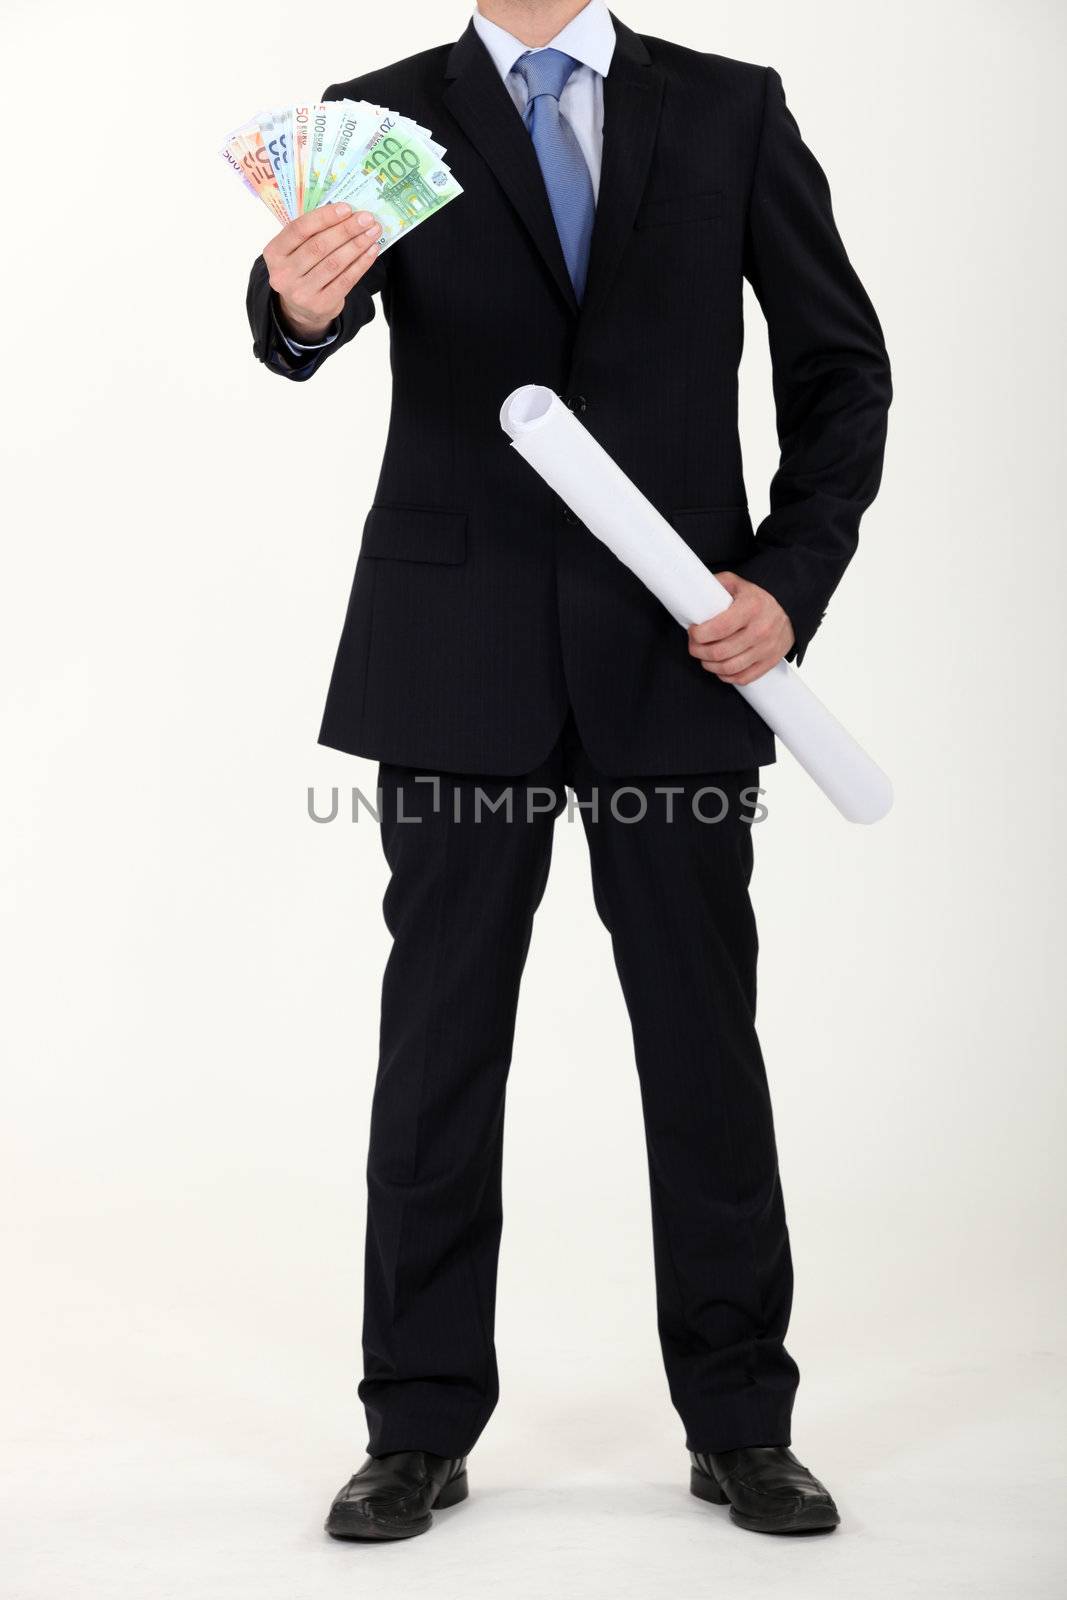 Businessman with architectural plans and a fistful of Euros by phovoir